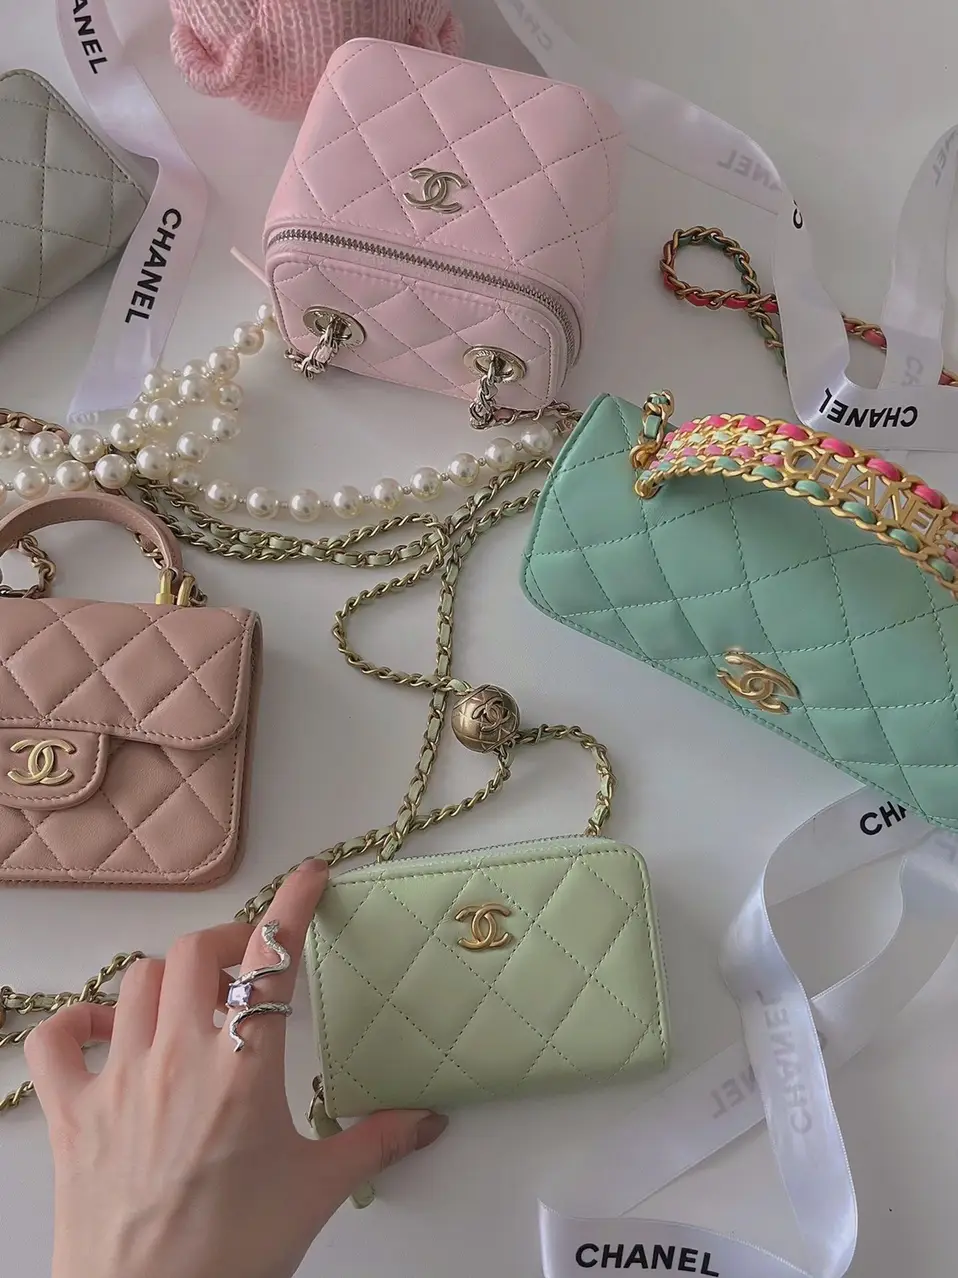 CHANEL bag, Summer ice cream color matching